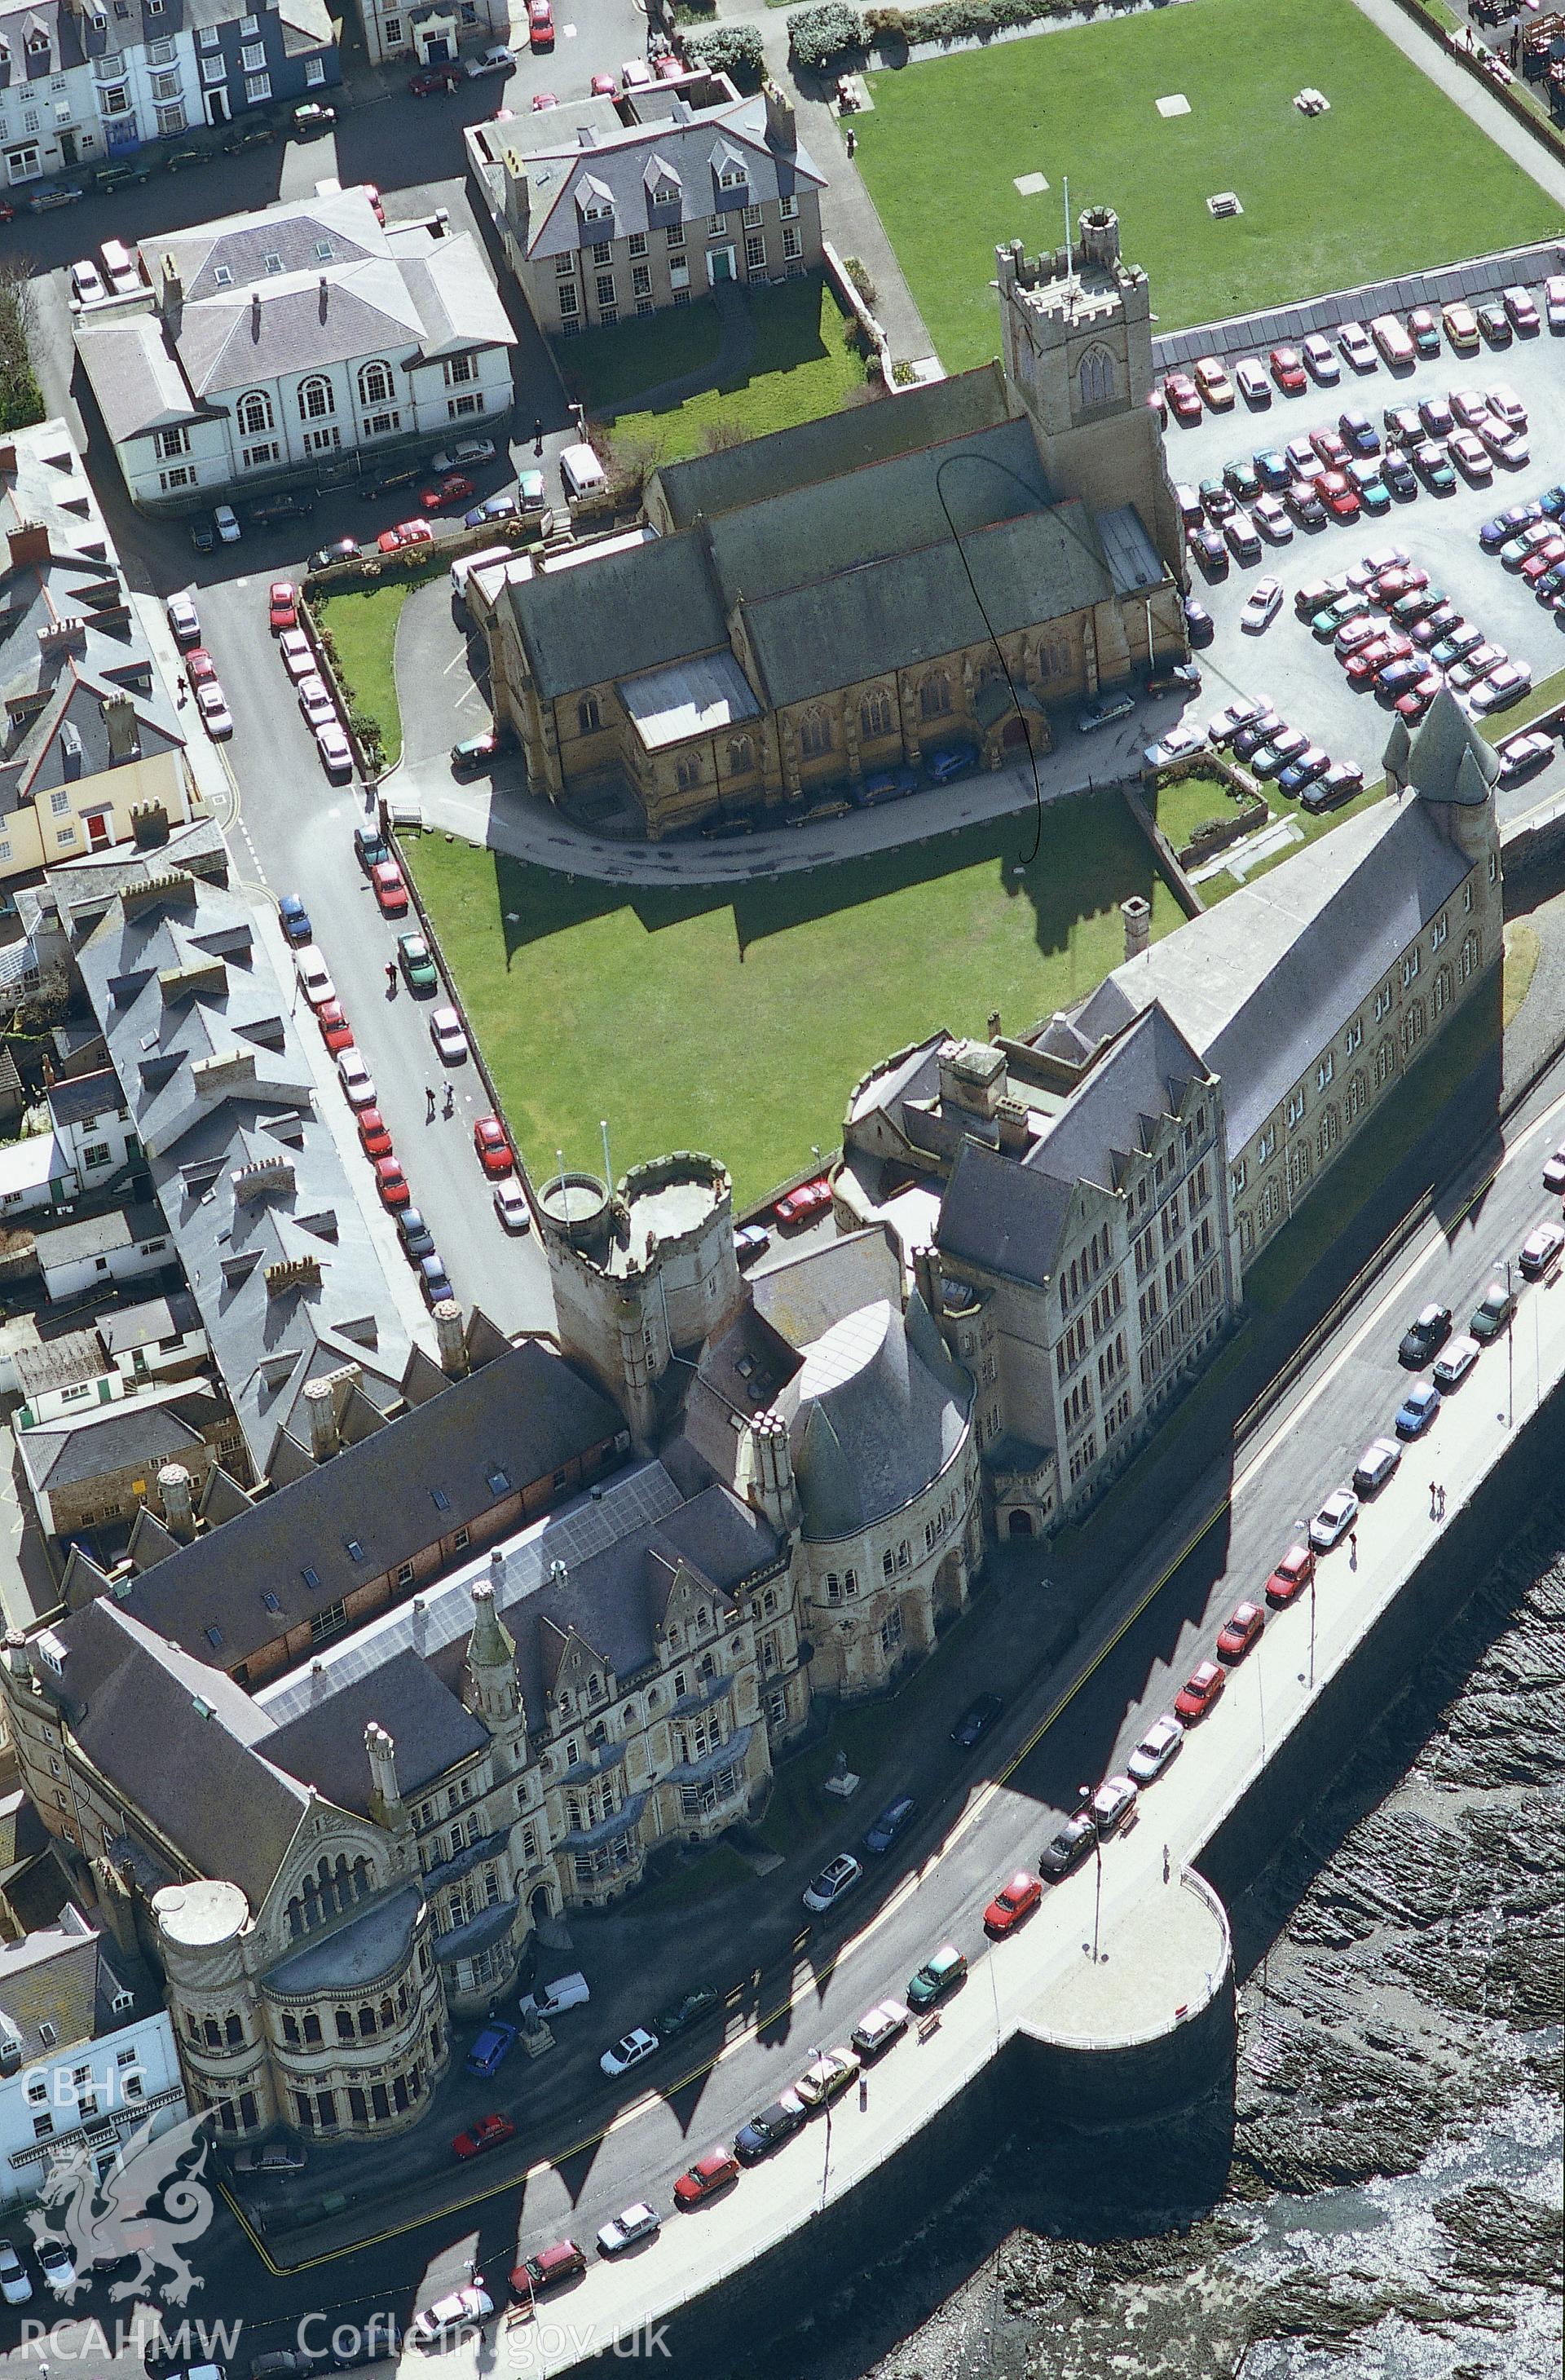 RCAHMW colour oblique aerial photograph of Old College, Aberystwyth. Taken by Toby Driver 2004.